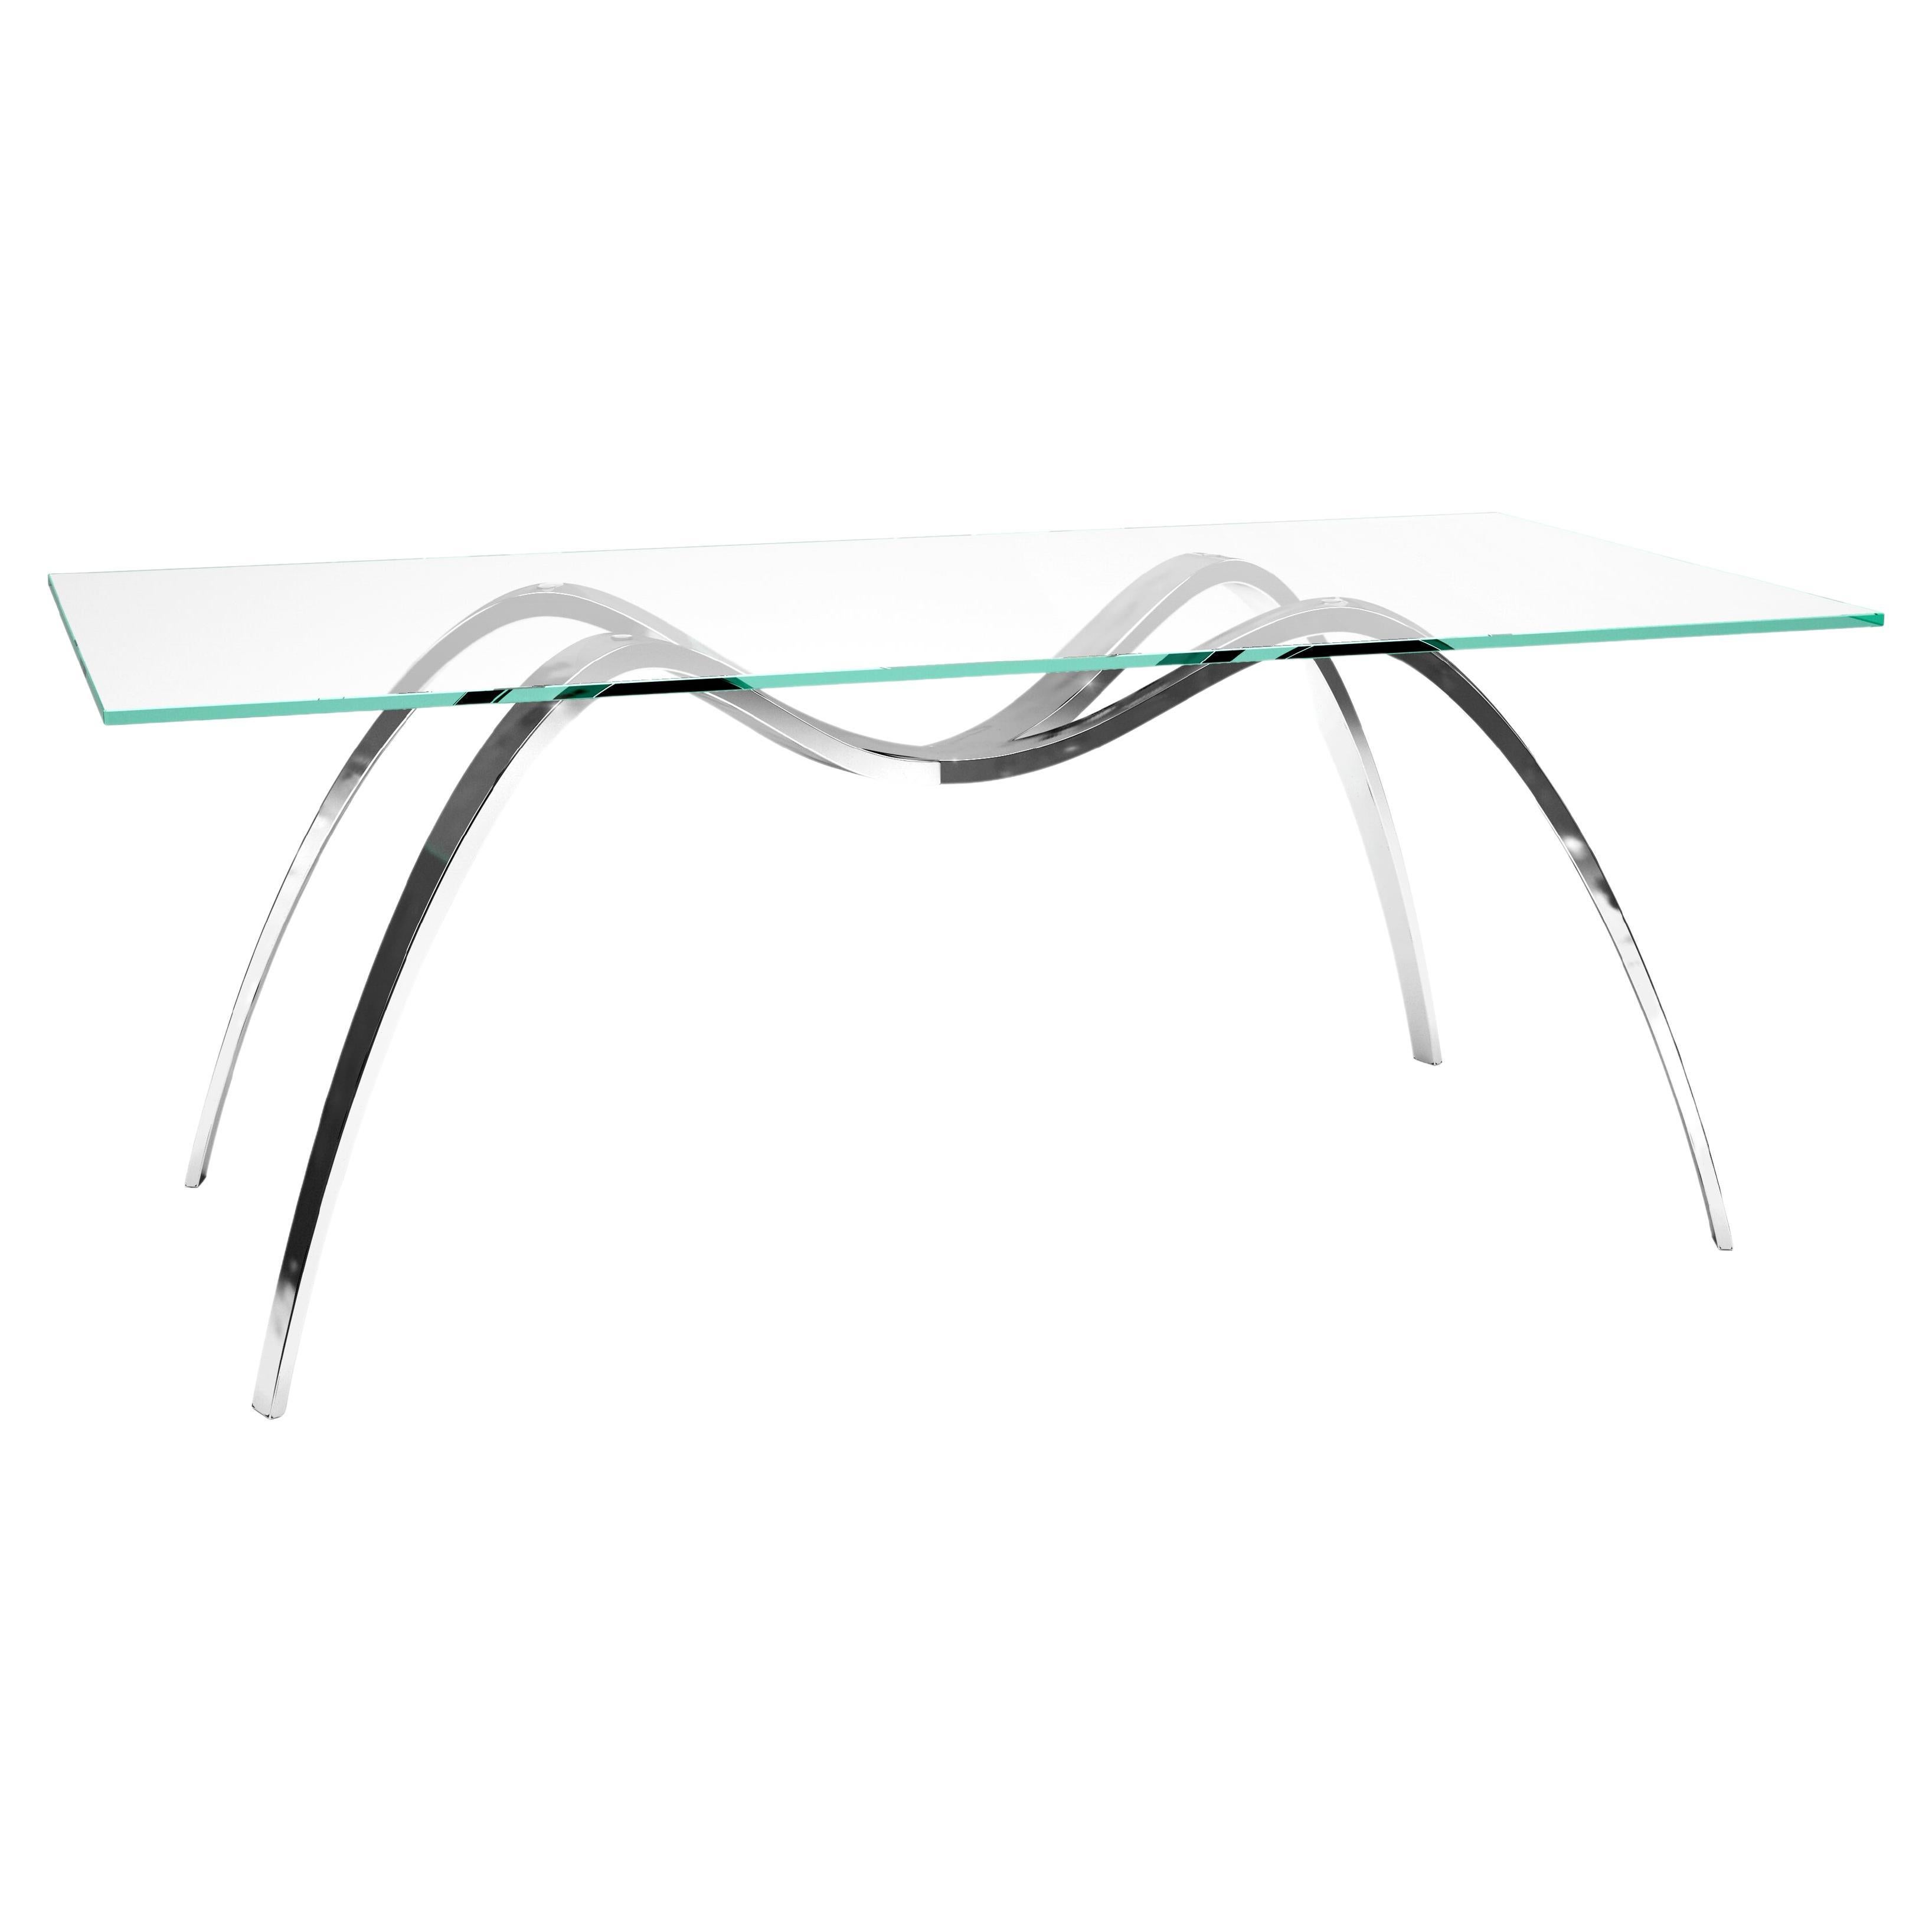 Dining Table Writing Desk Spider Leg Glass Top Mirror Steel Collectible Design